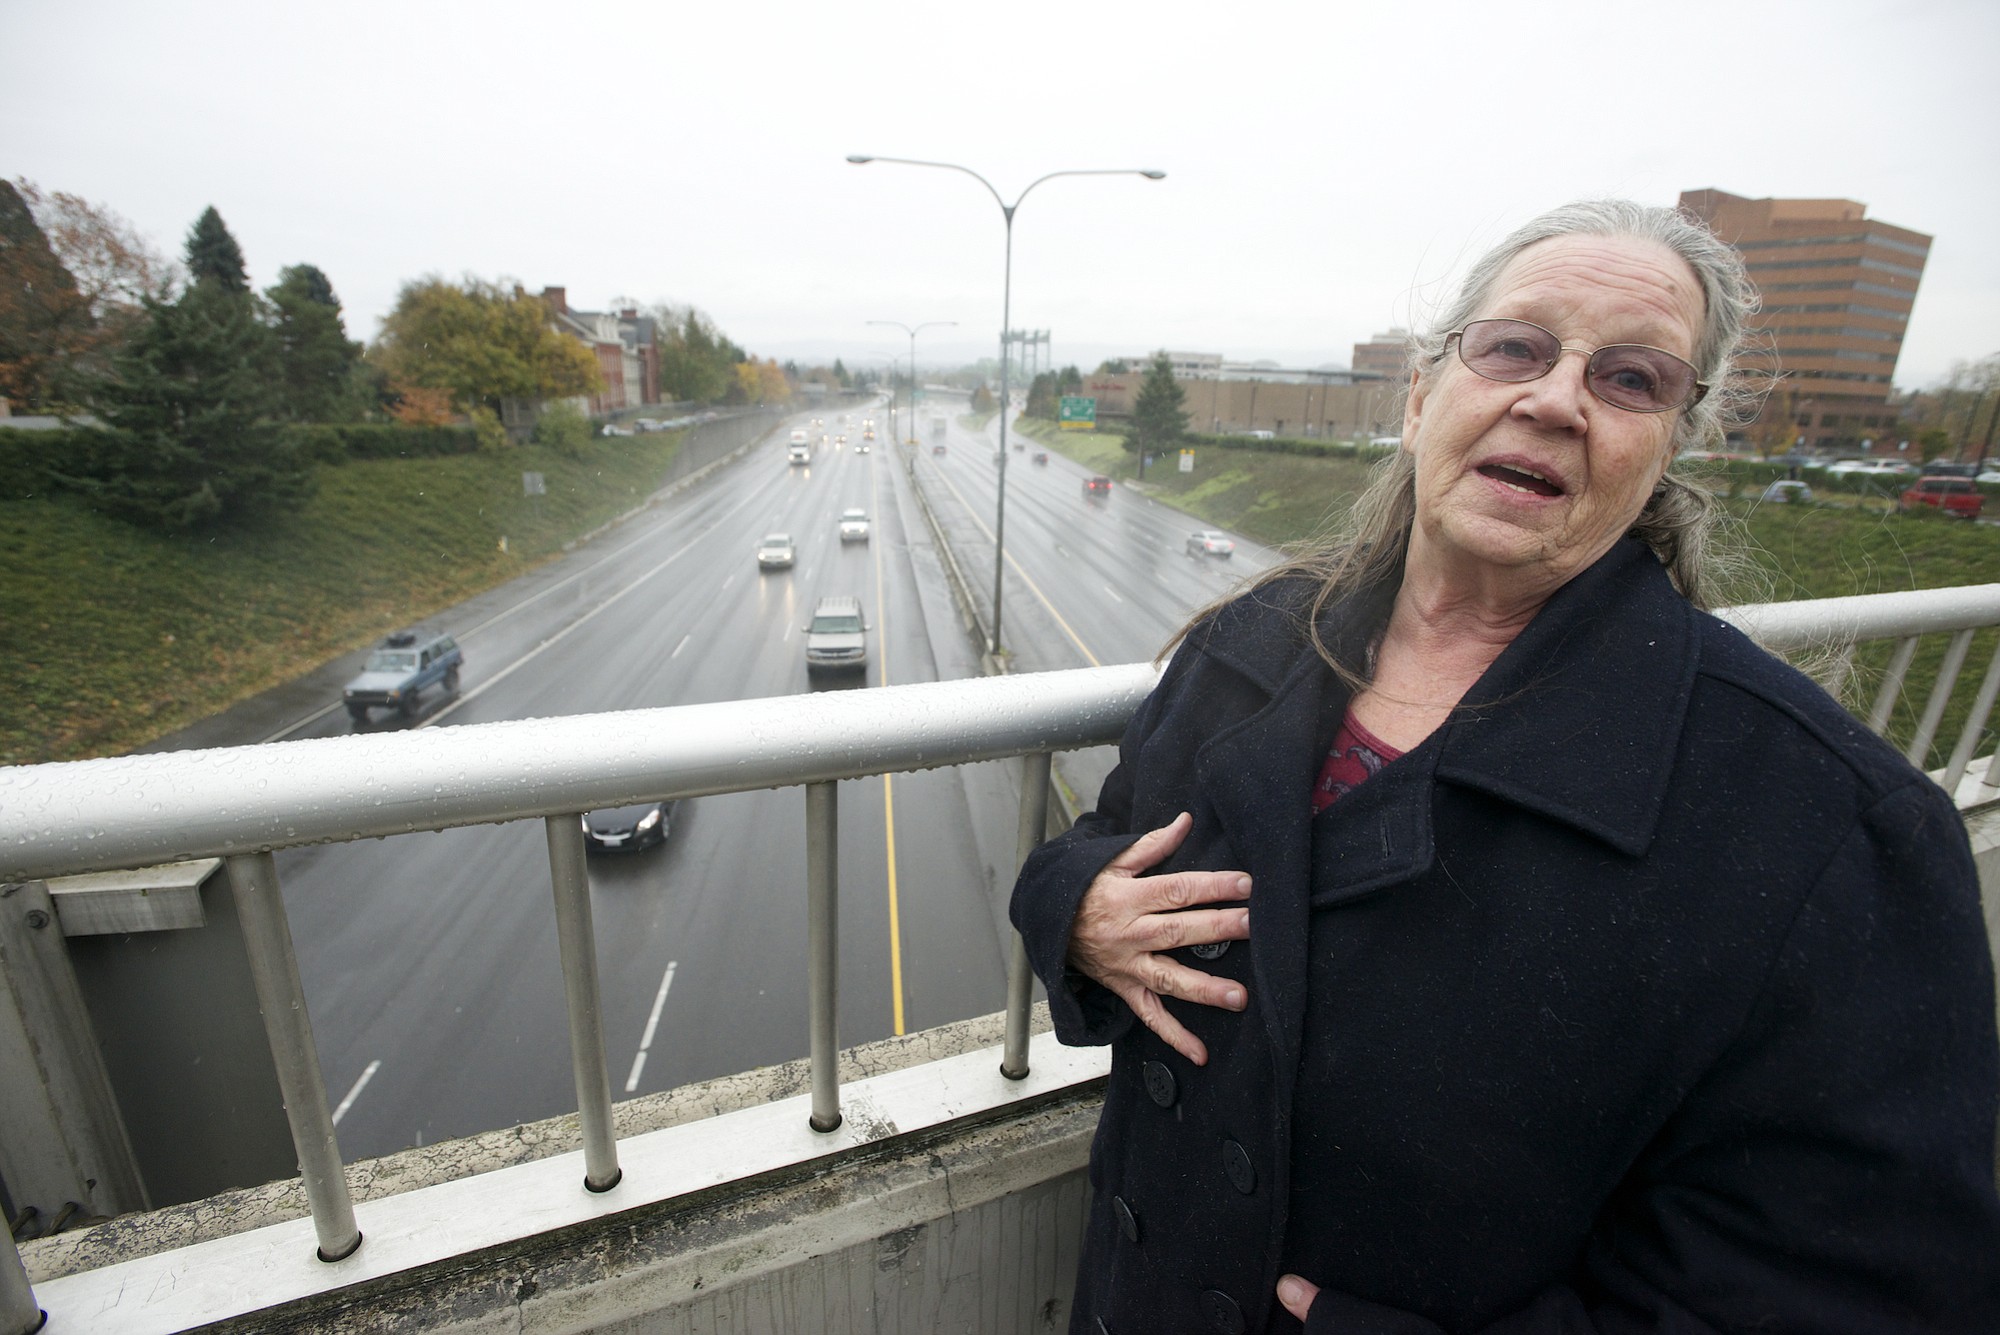 Carol Miller, 68, saved the life of a woman who was attempting to jump off of East Evergreen Boulevard onto Interstate 5 on Wednesday.